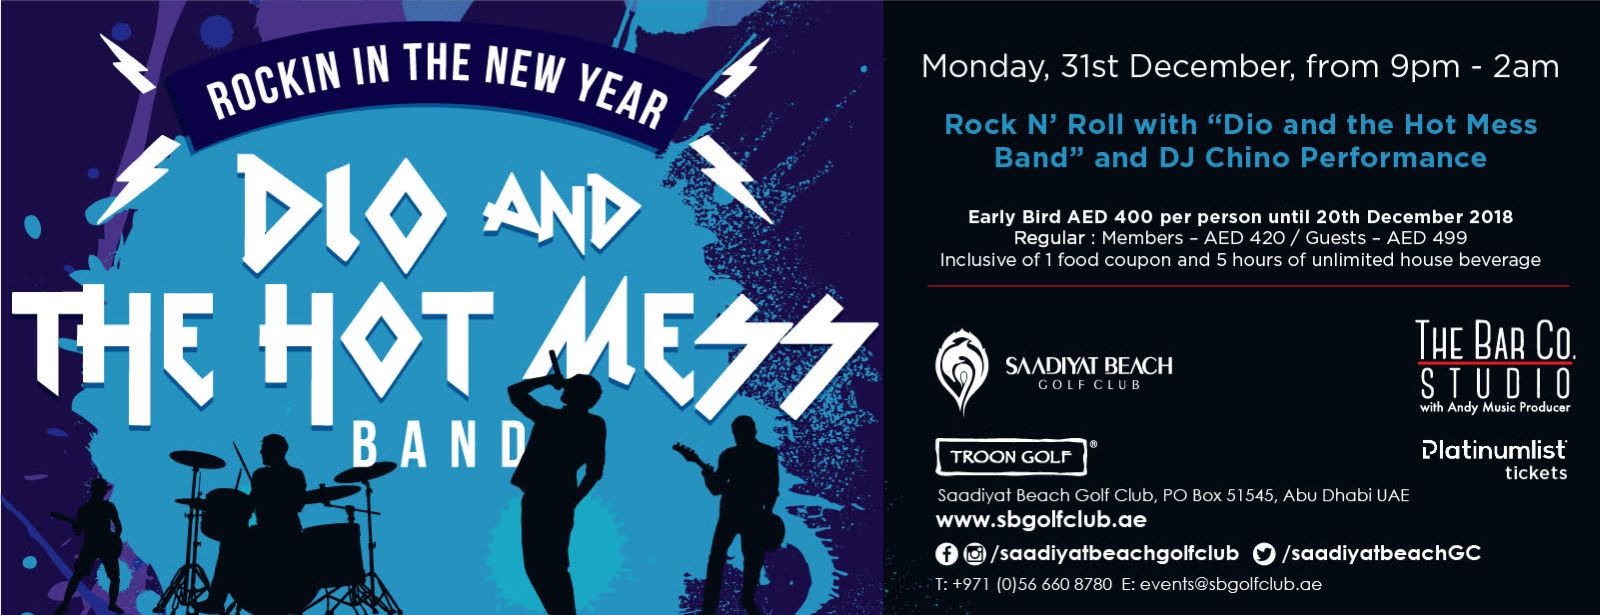 Rock N’ Roll NYE – Dio and the Hot Mess Band - Coming Soon in UAE